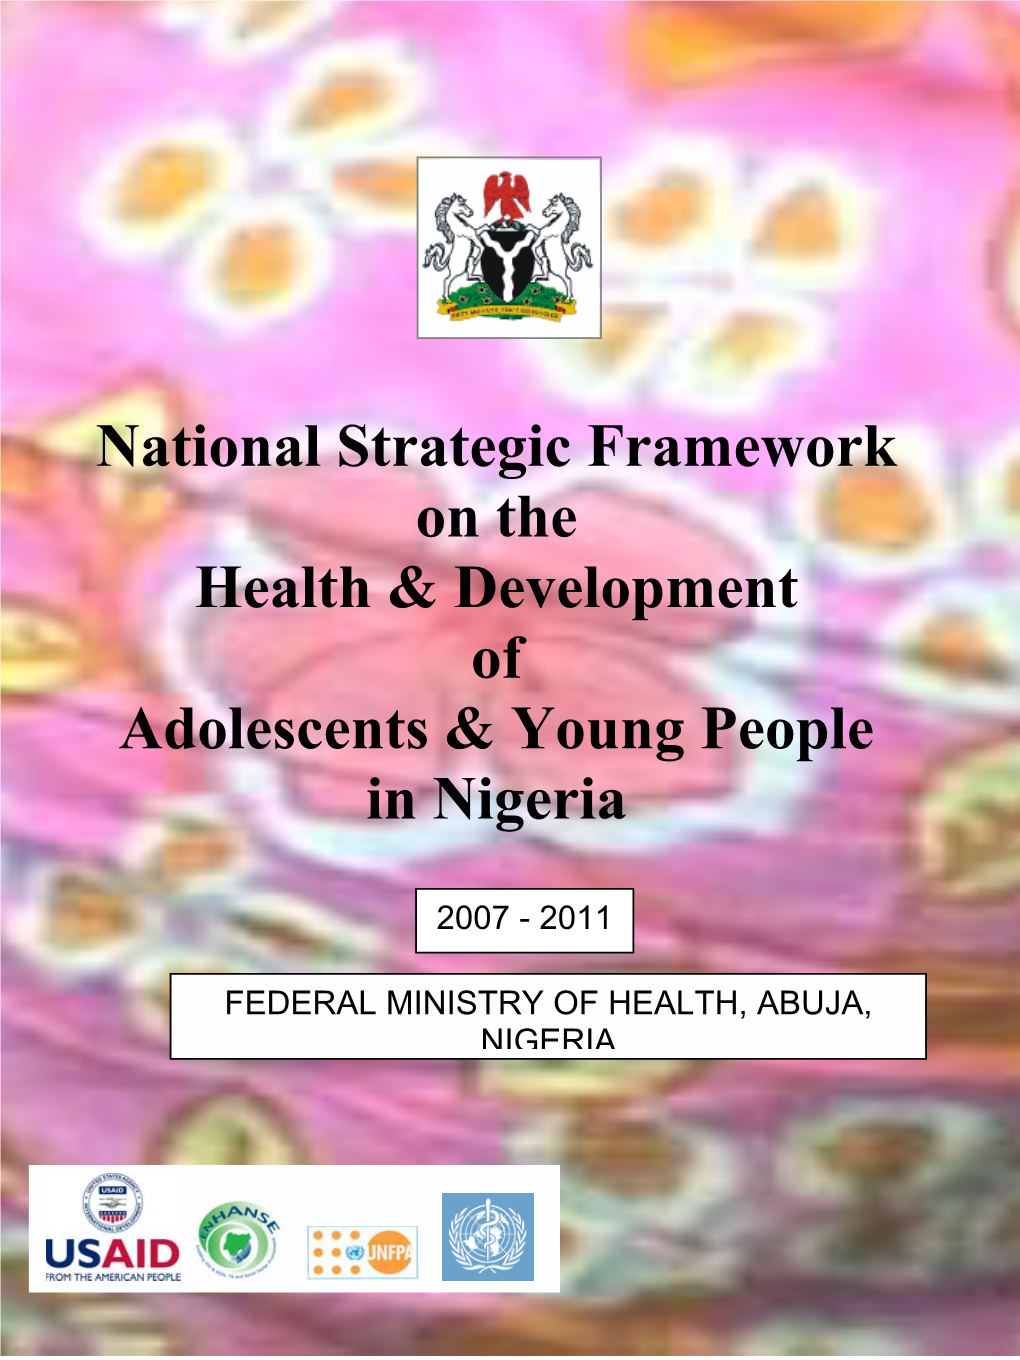 National Strategic Framework on the Health & Development of Adolescents & Young People in Nigeria